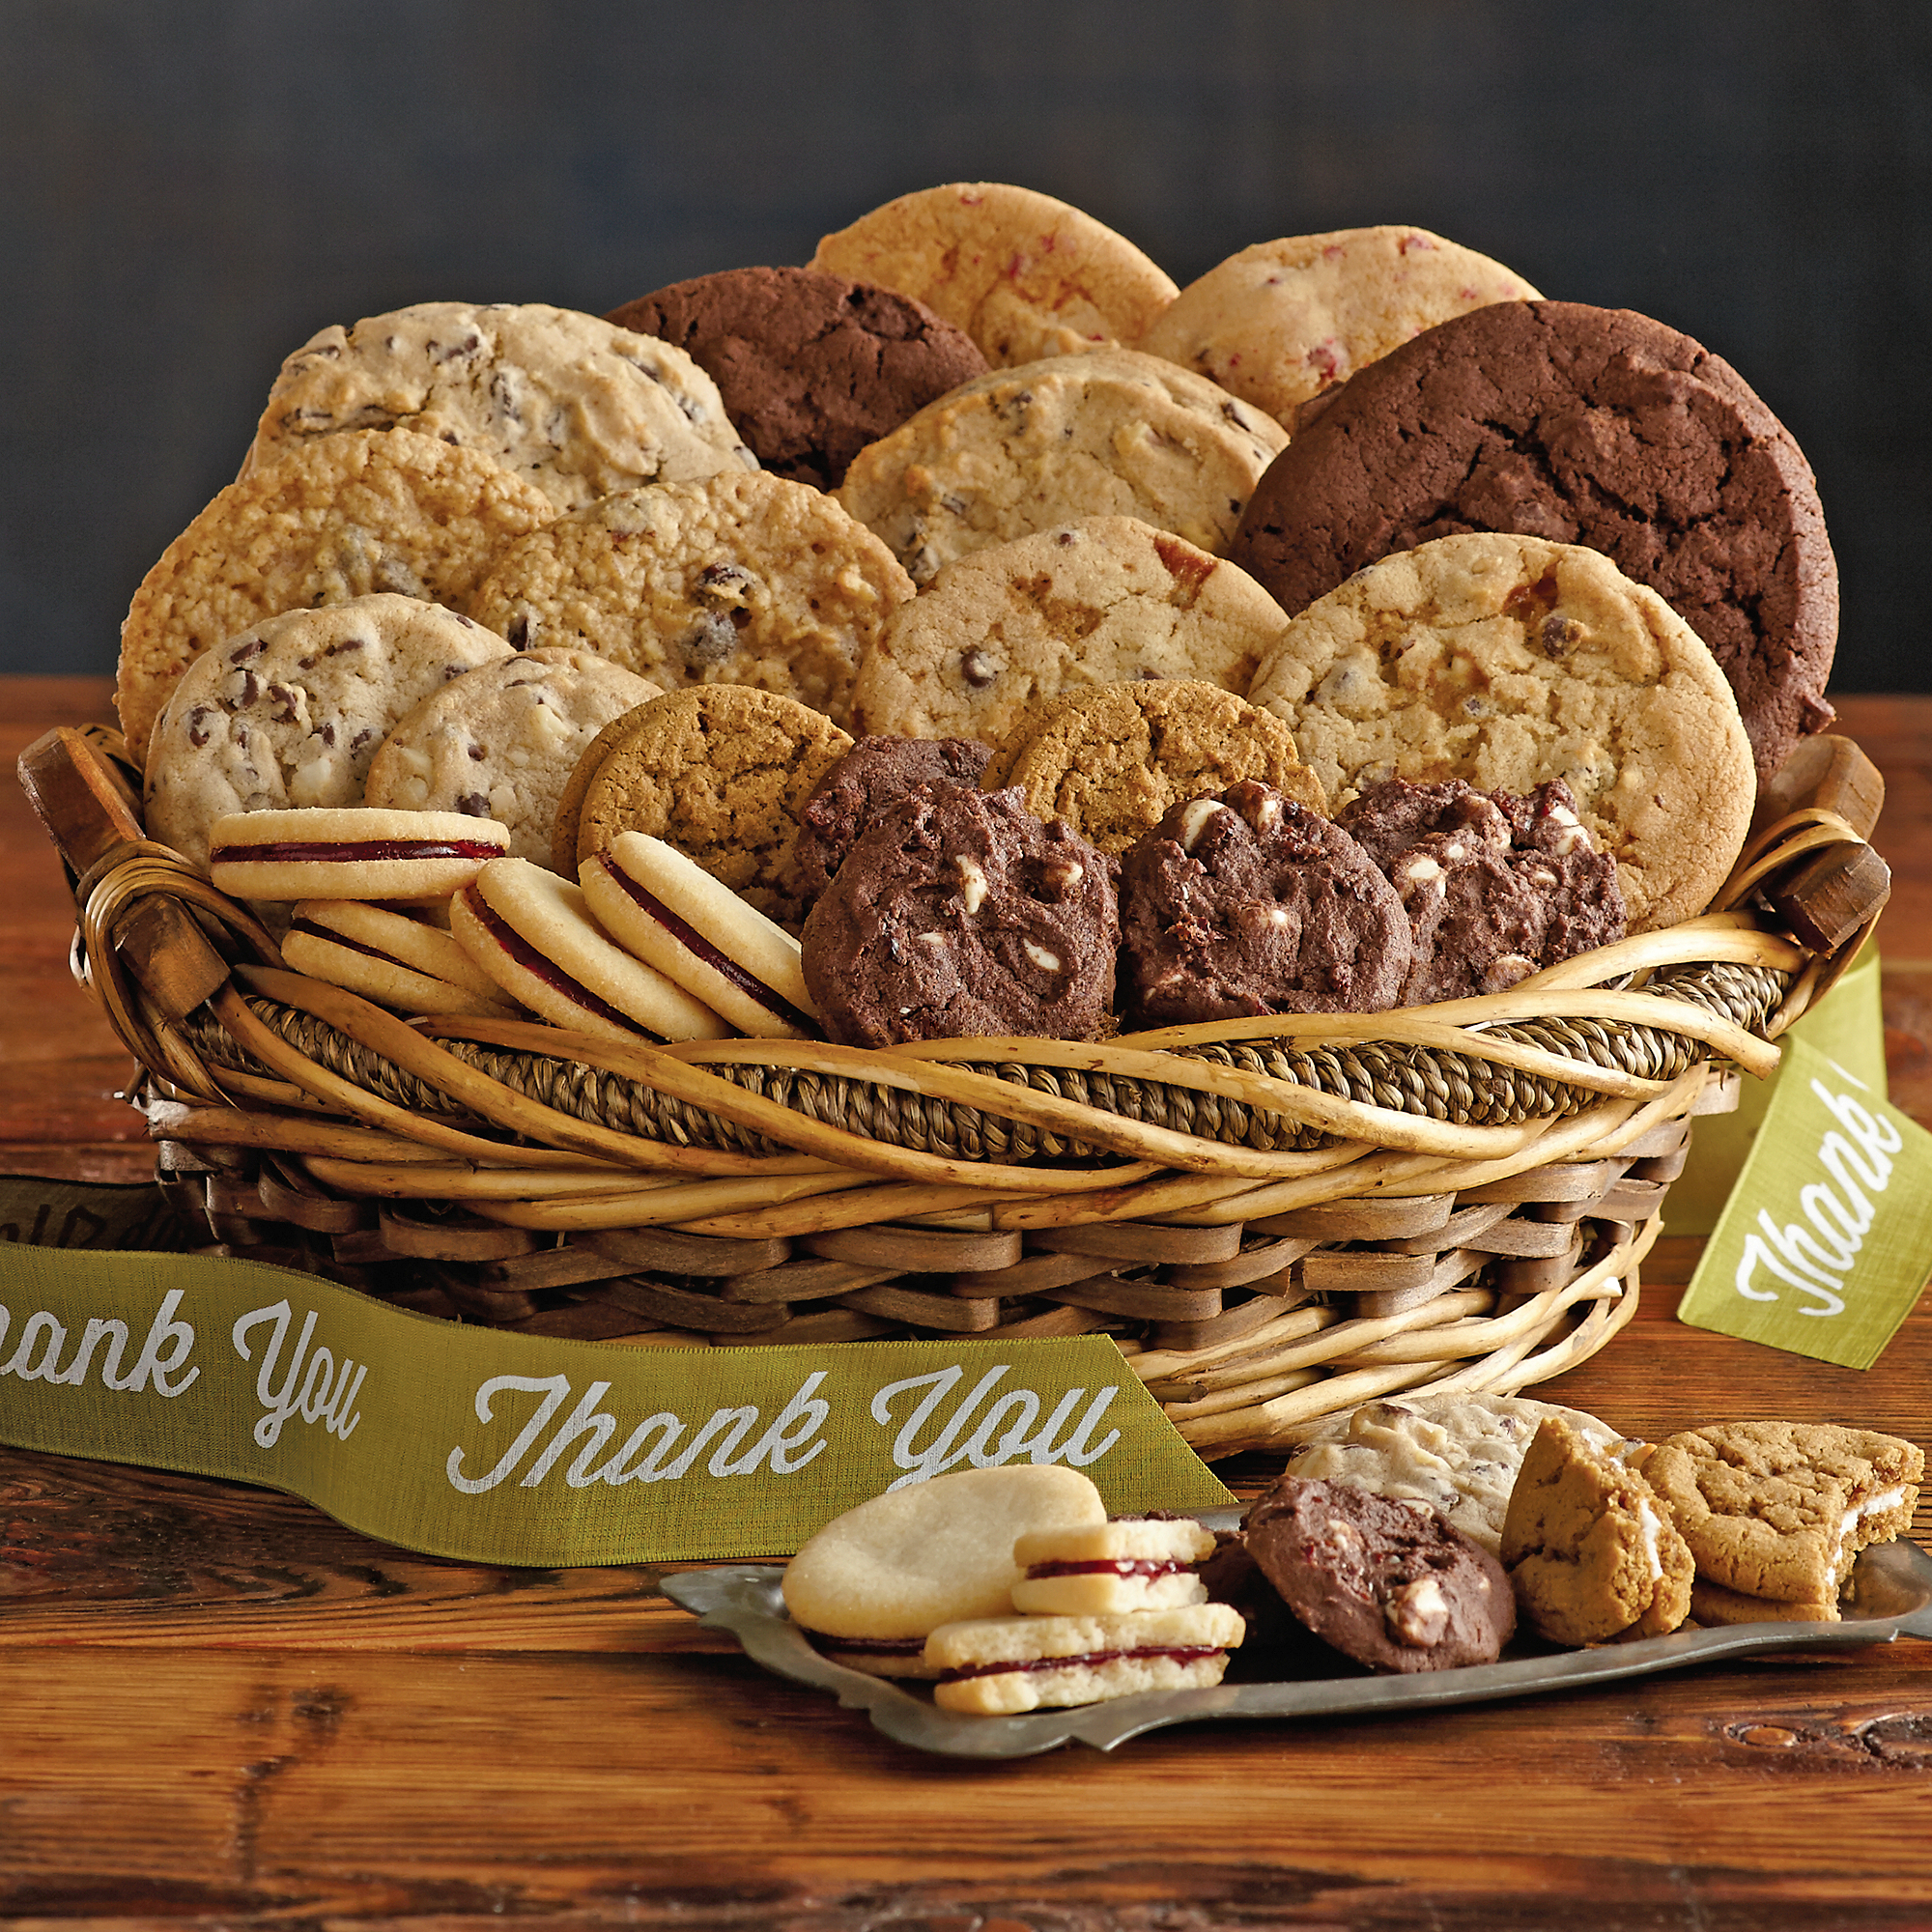 Thank You Cookie Gift Basket Cookies and Brownies Harry & David